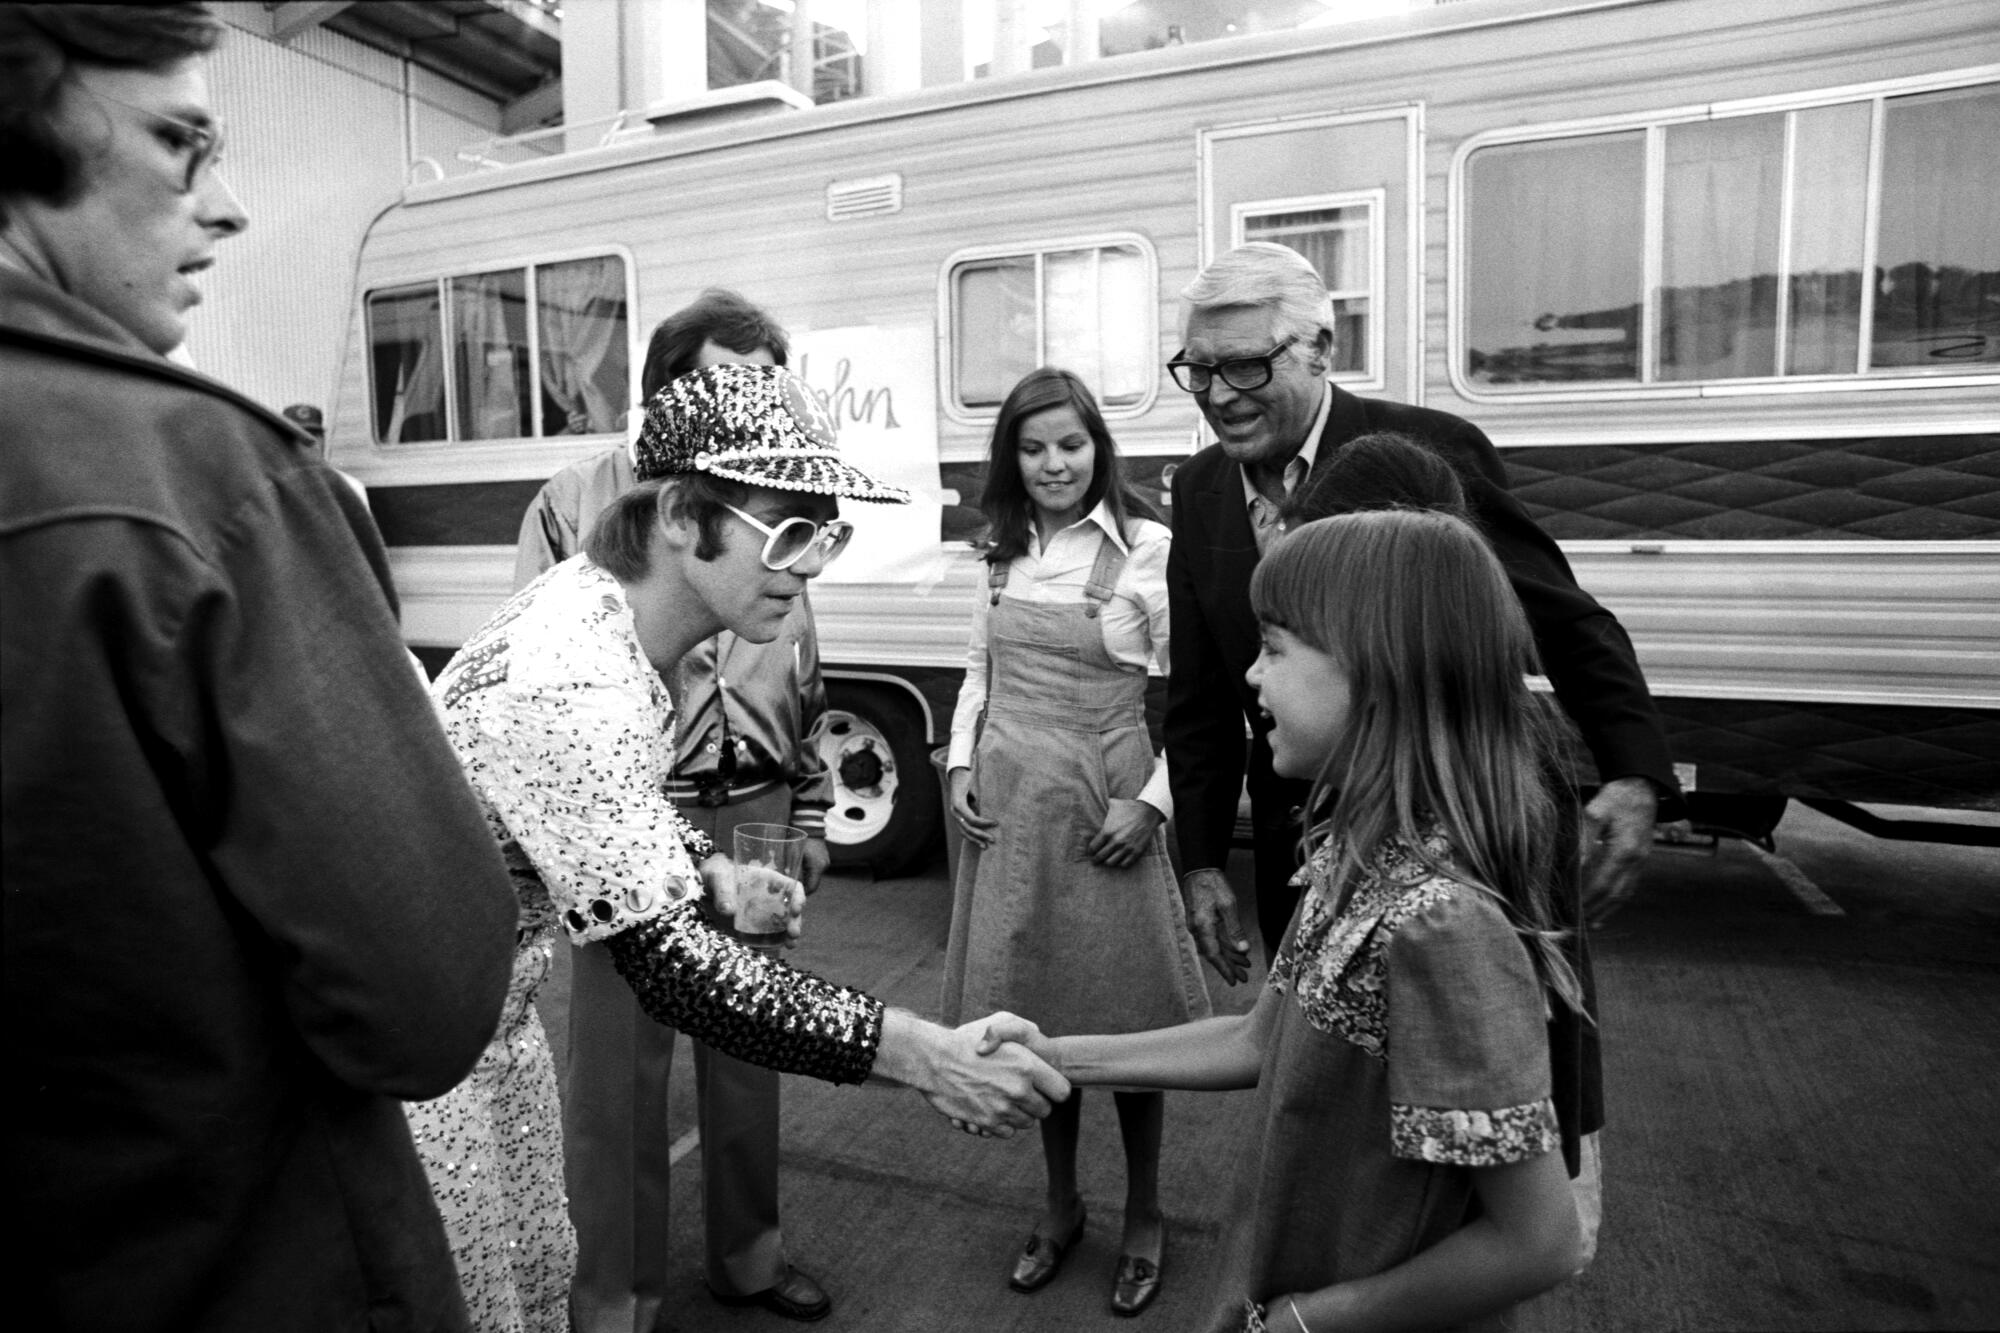 A musician in a sequined costume shakes hand with a young girl backstage